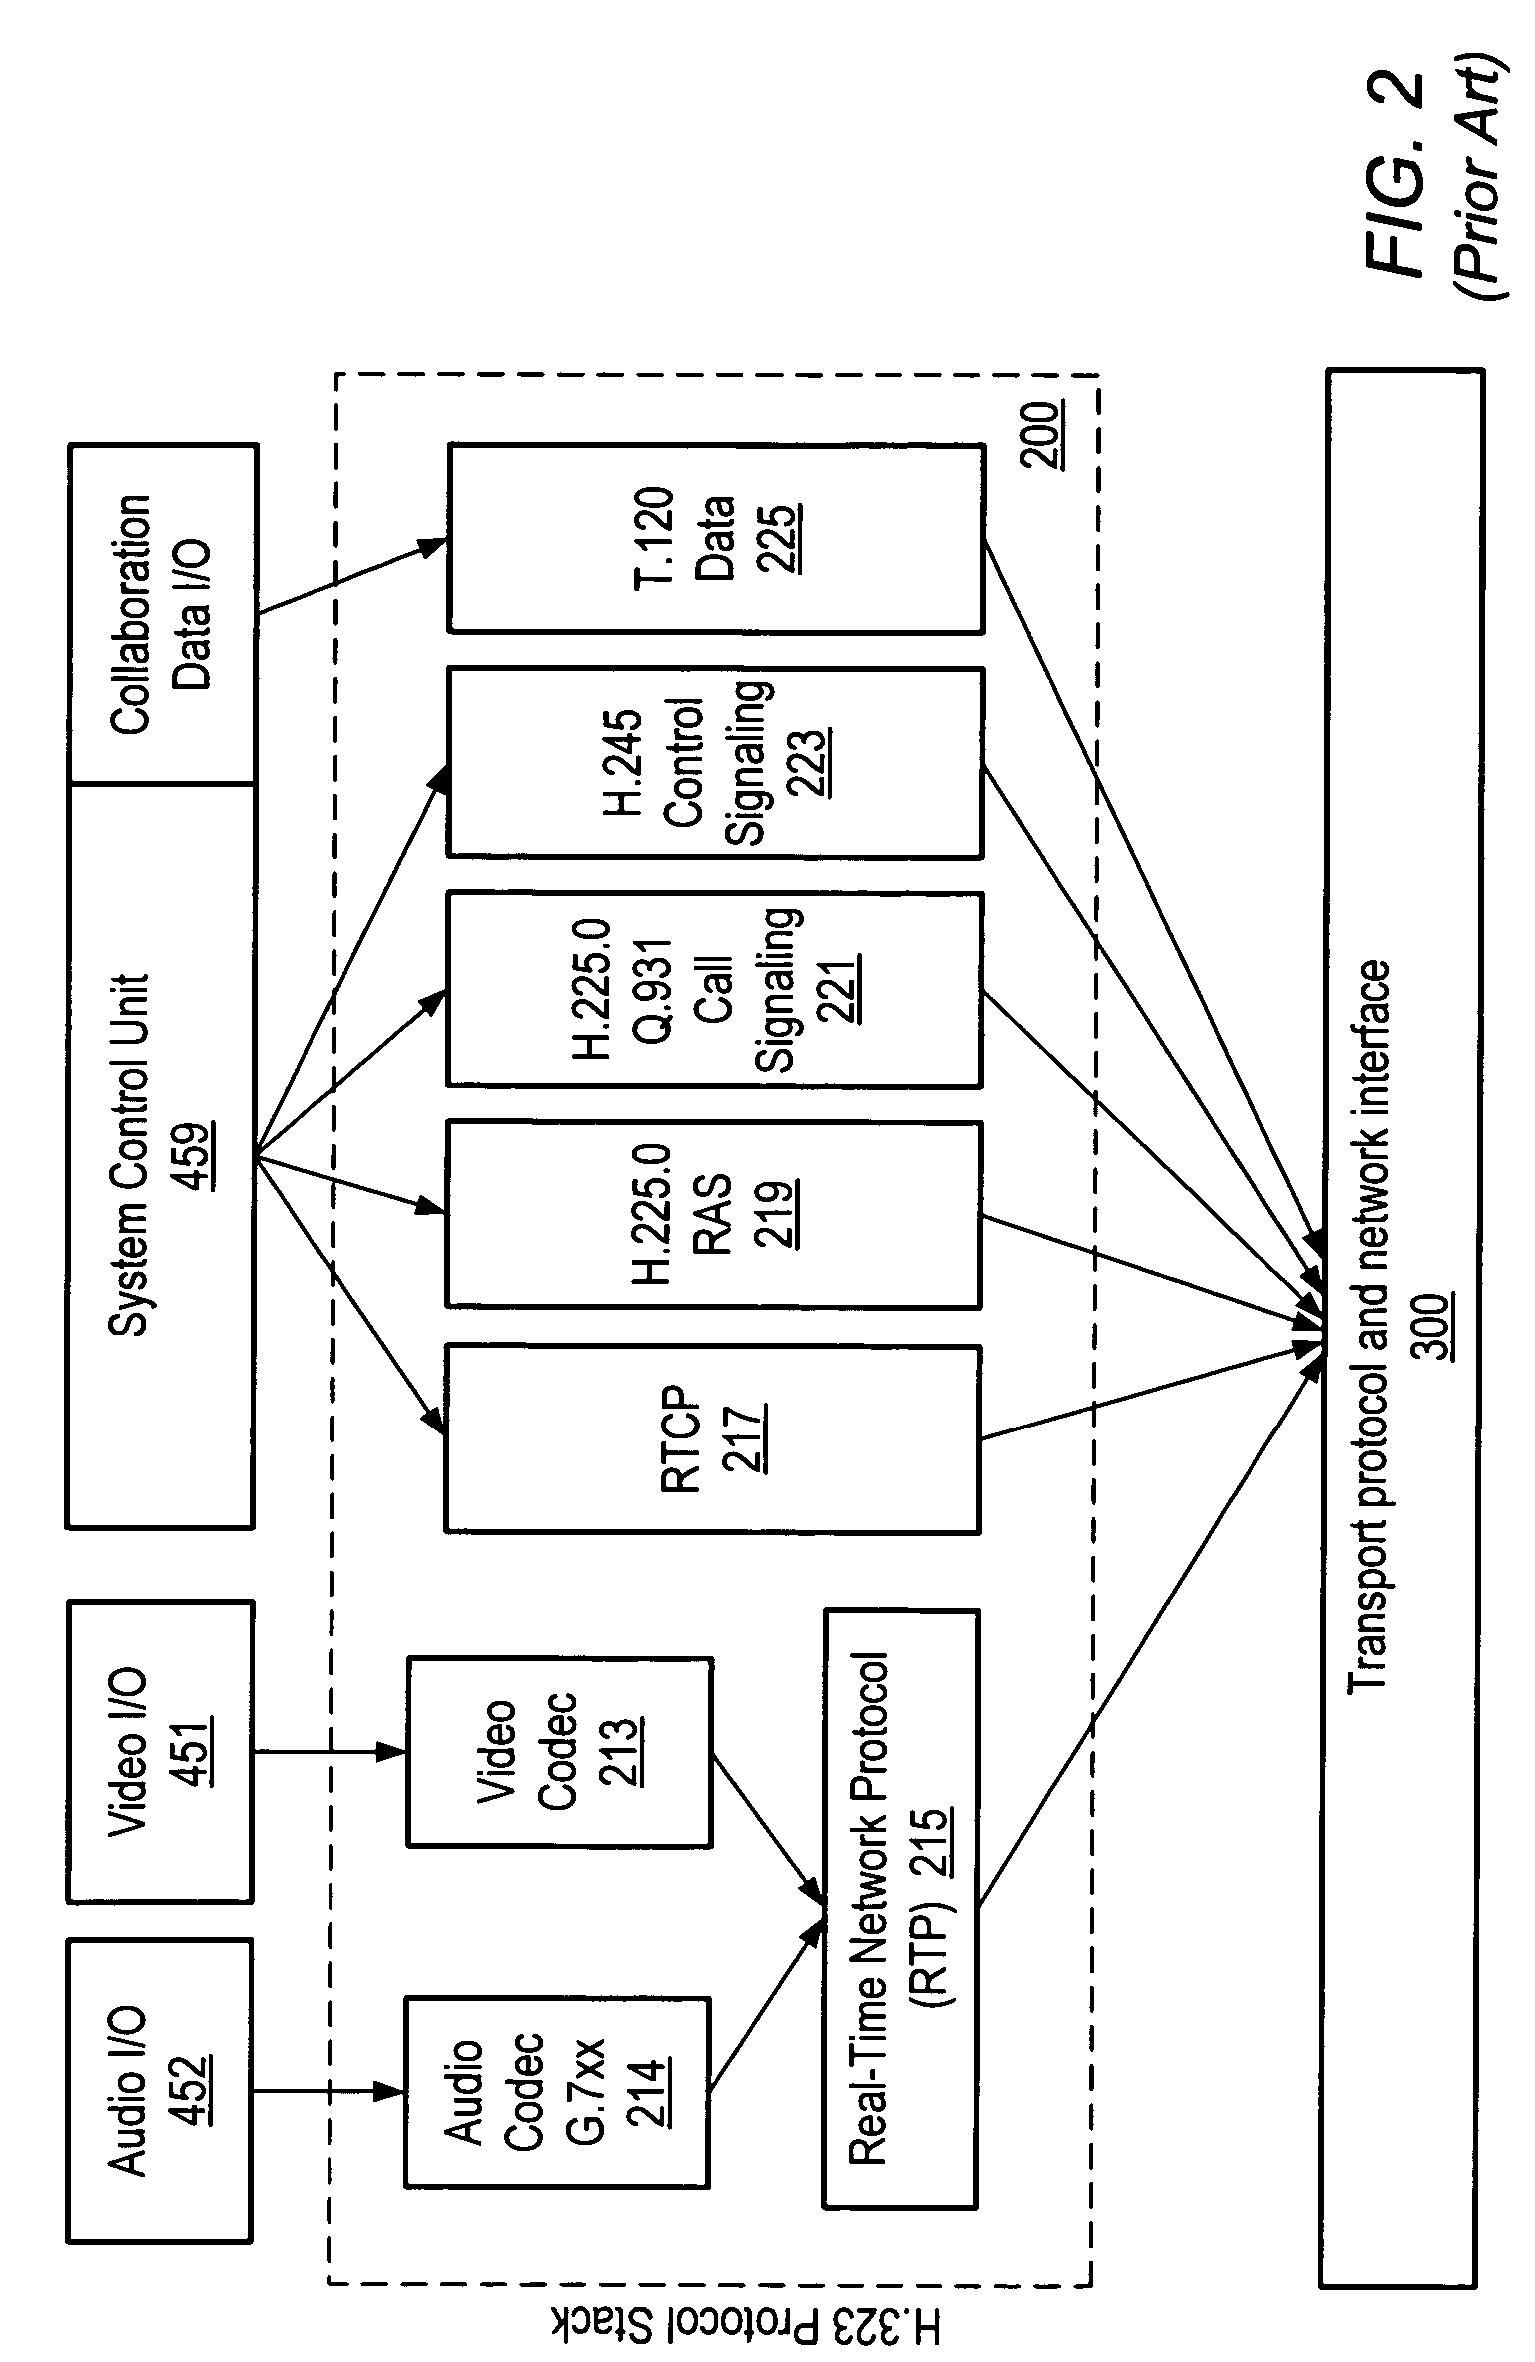 Media based collaboration using mixed-mode PSTN and internet networks